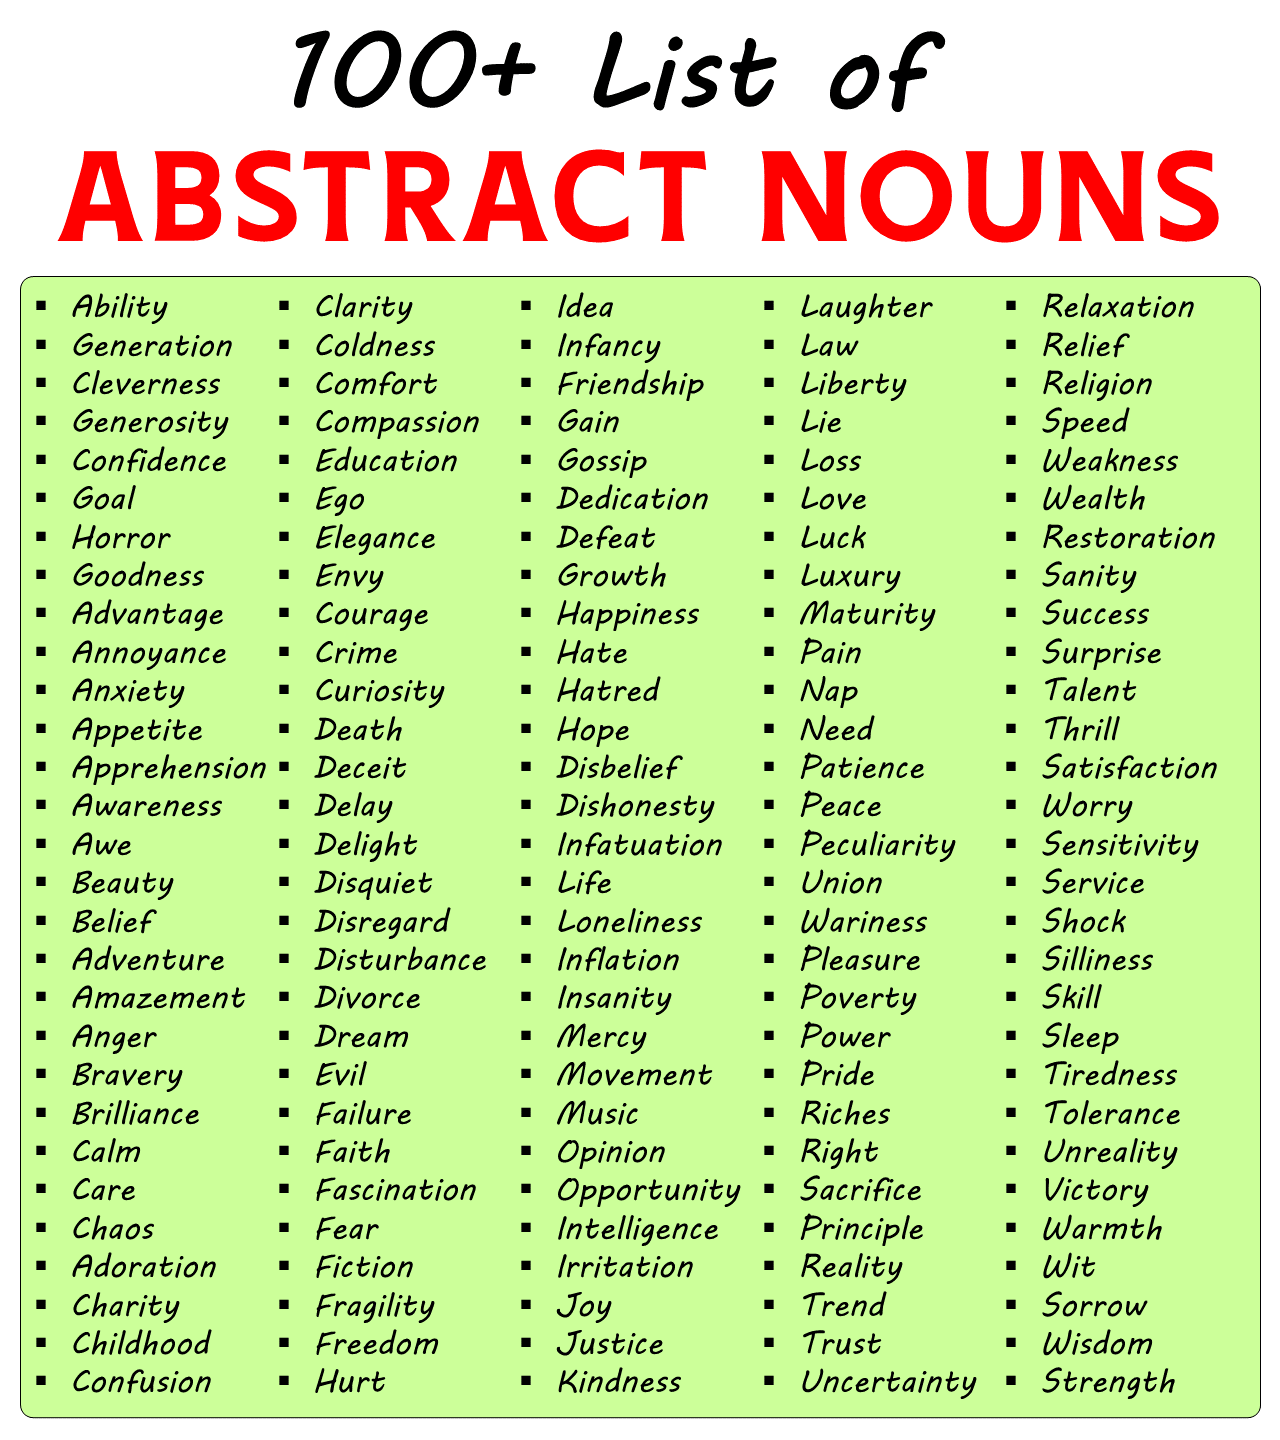 List of Abstract Nouns